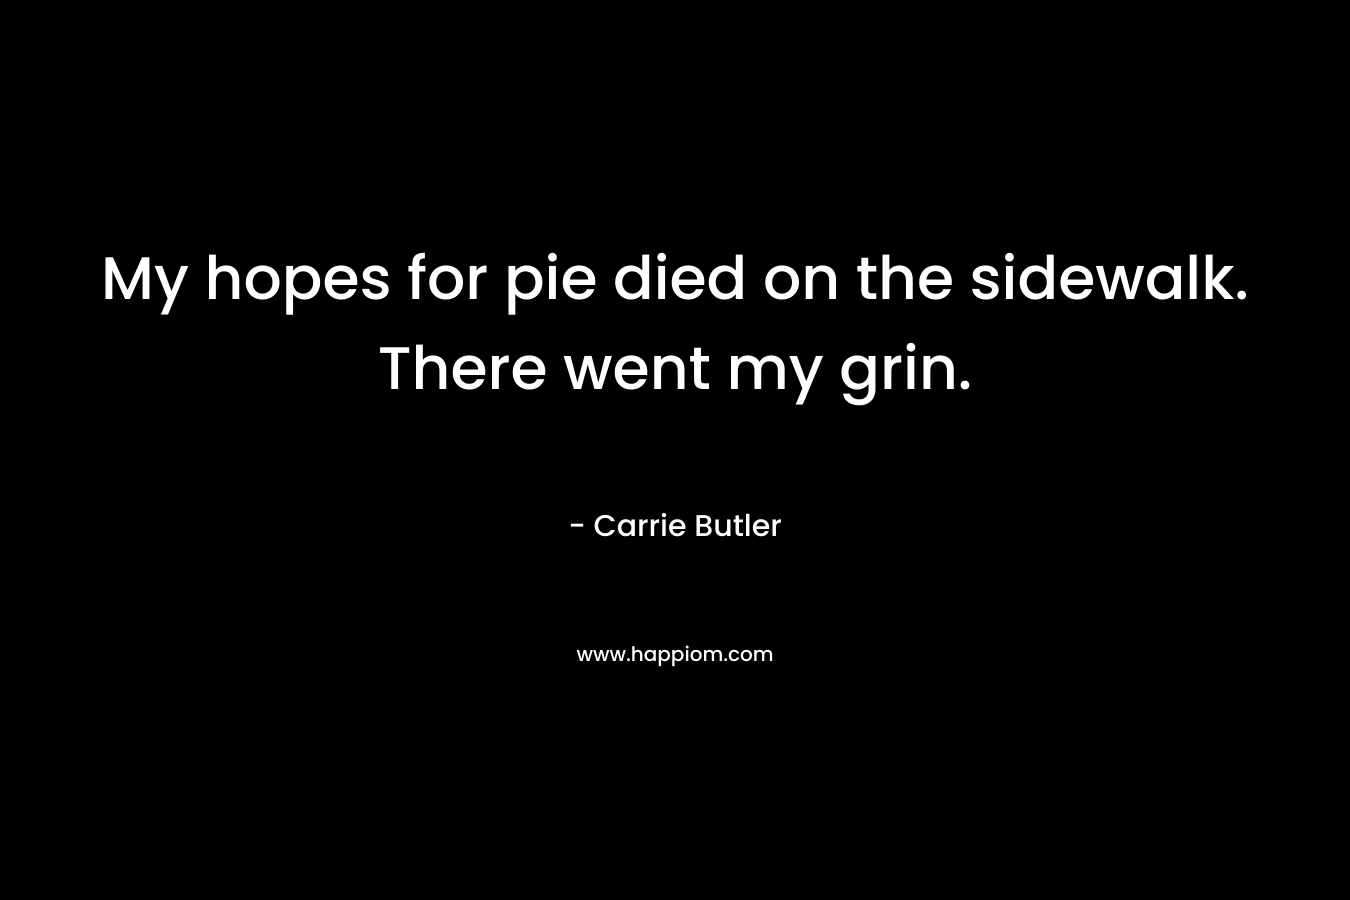 My hopes for pie died on the sidewalk. There went my grin.